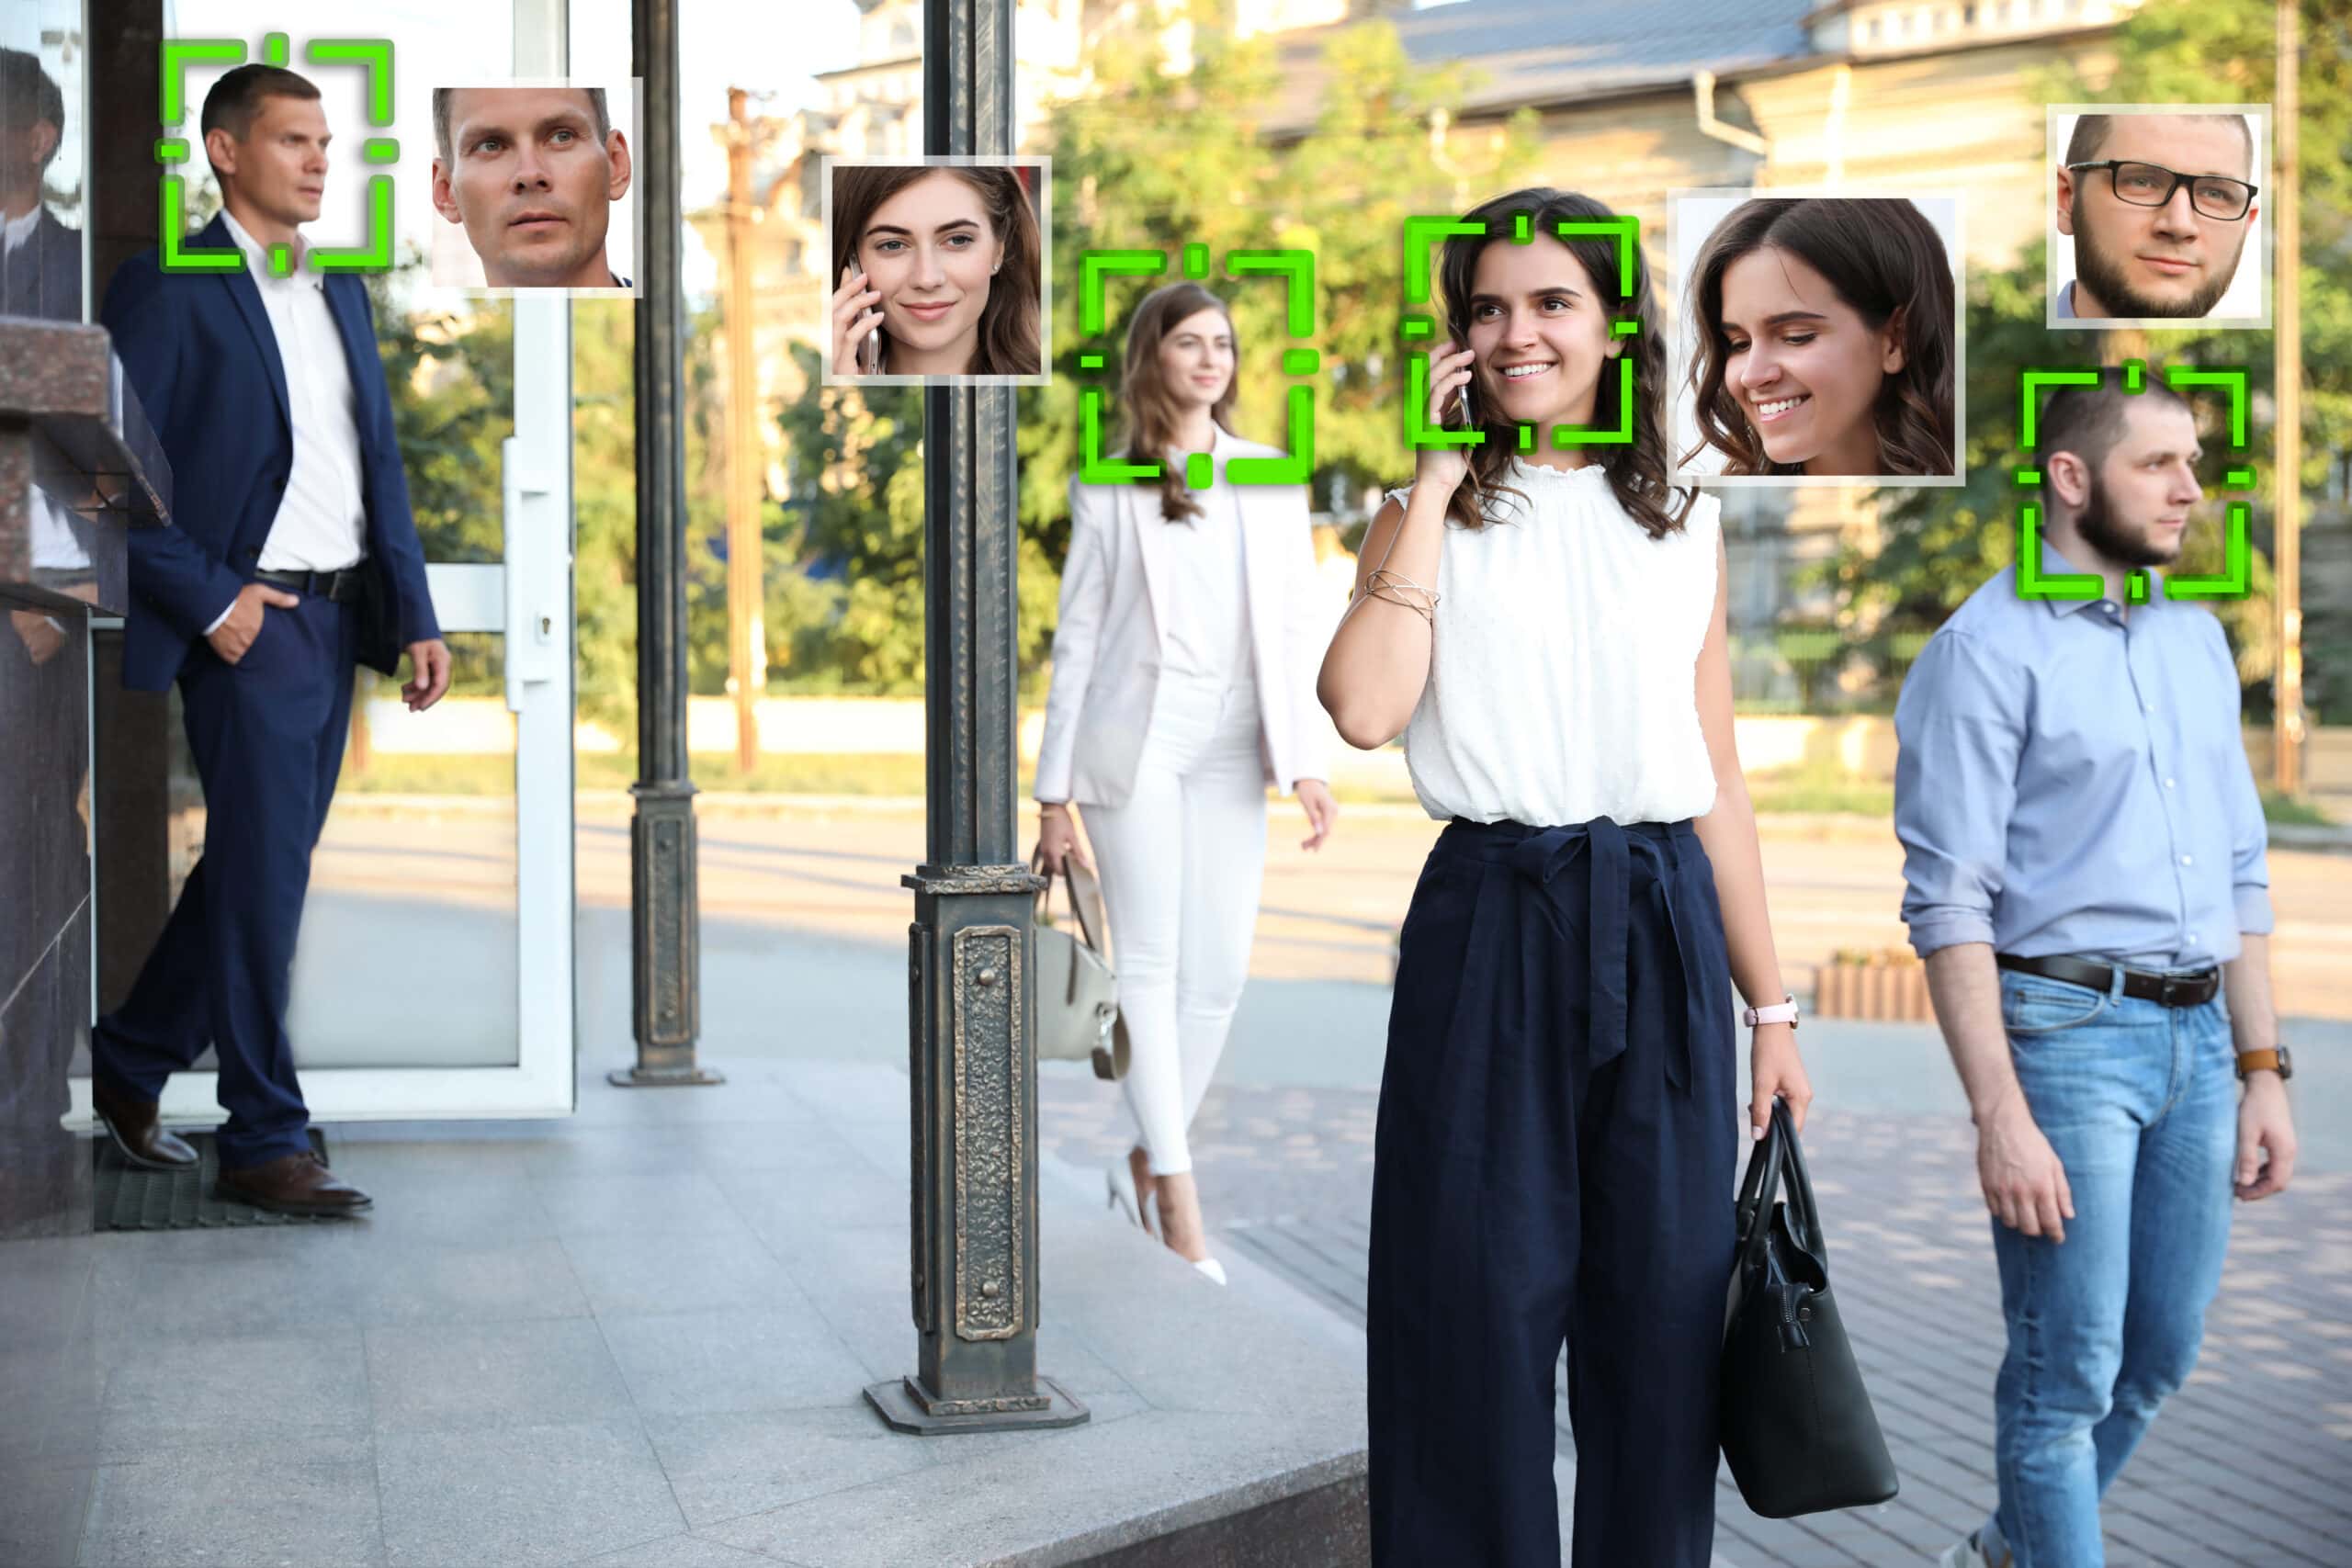 Significance of Facial Recognition Technology in Modern Society